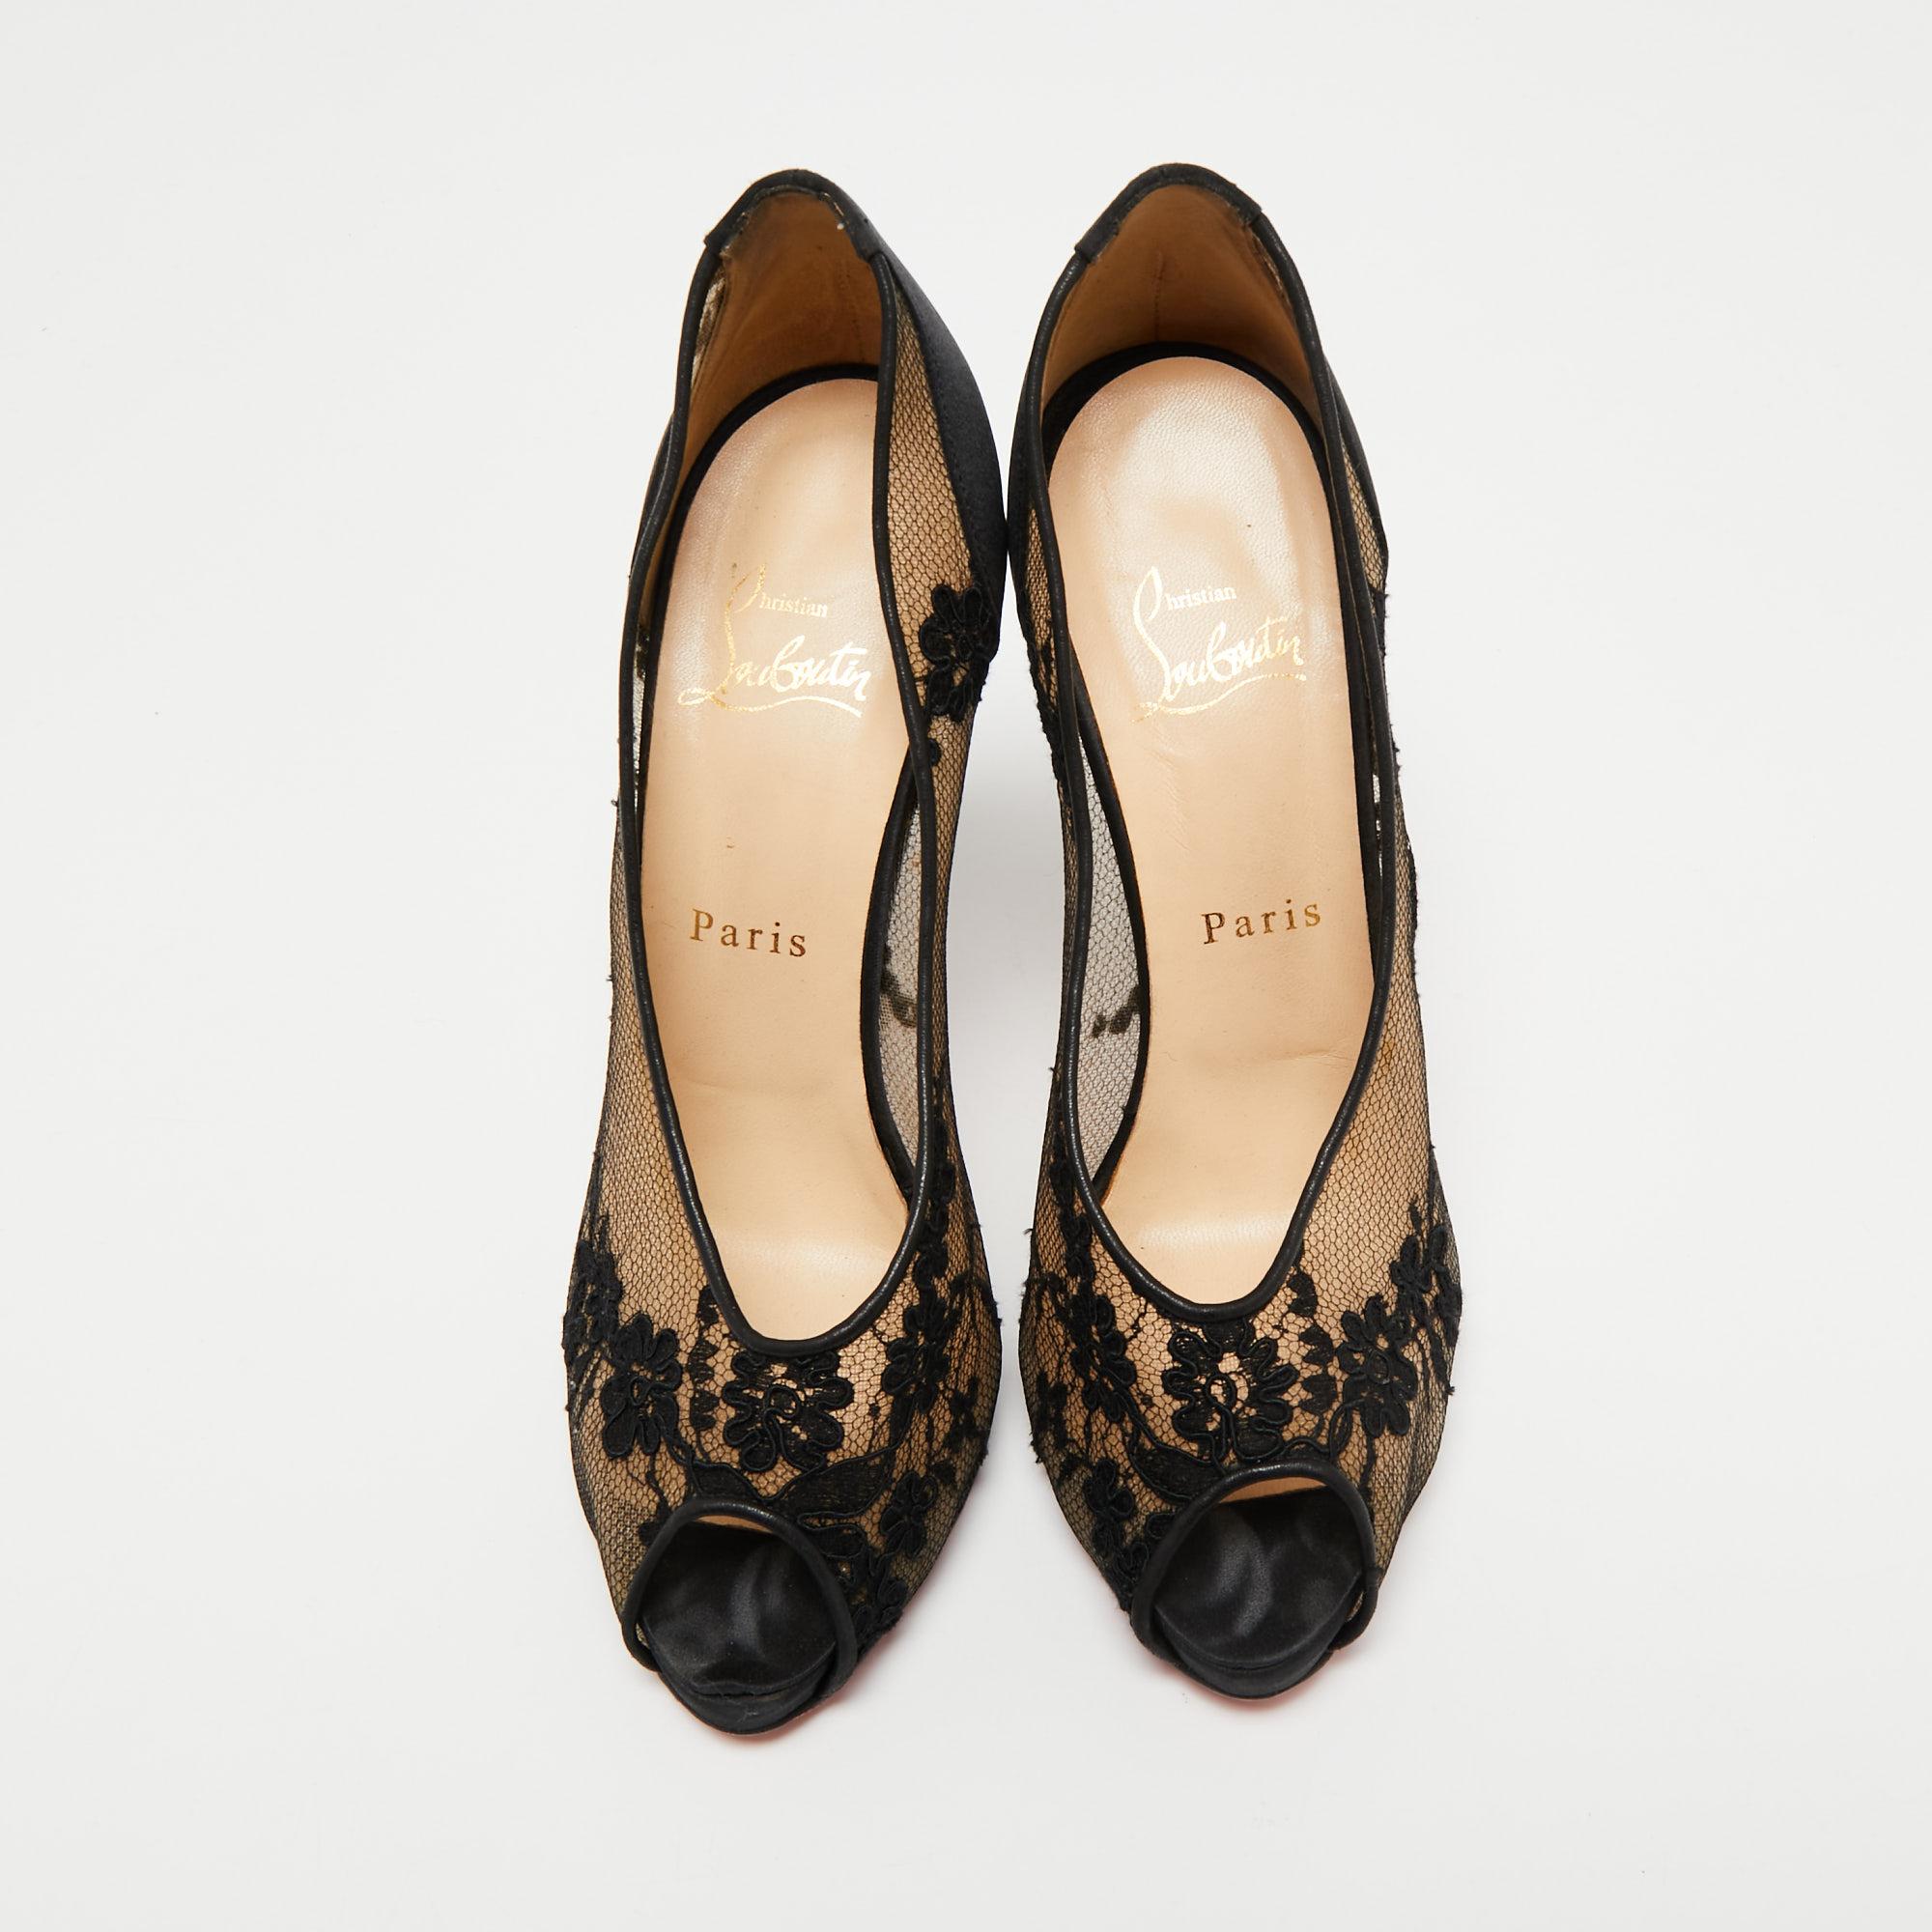 With a lacy surface adding to the overall semblance of its exterior, this pair of Christian Louboutin pumps is a classy piece of accessory to complete your outfit. The design also has 12.5 cm heels and peep toes that make sure you can flaunt an